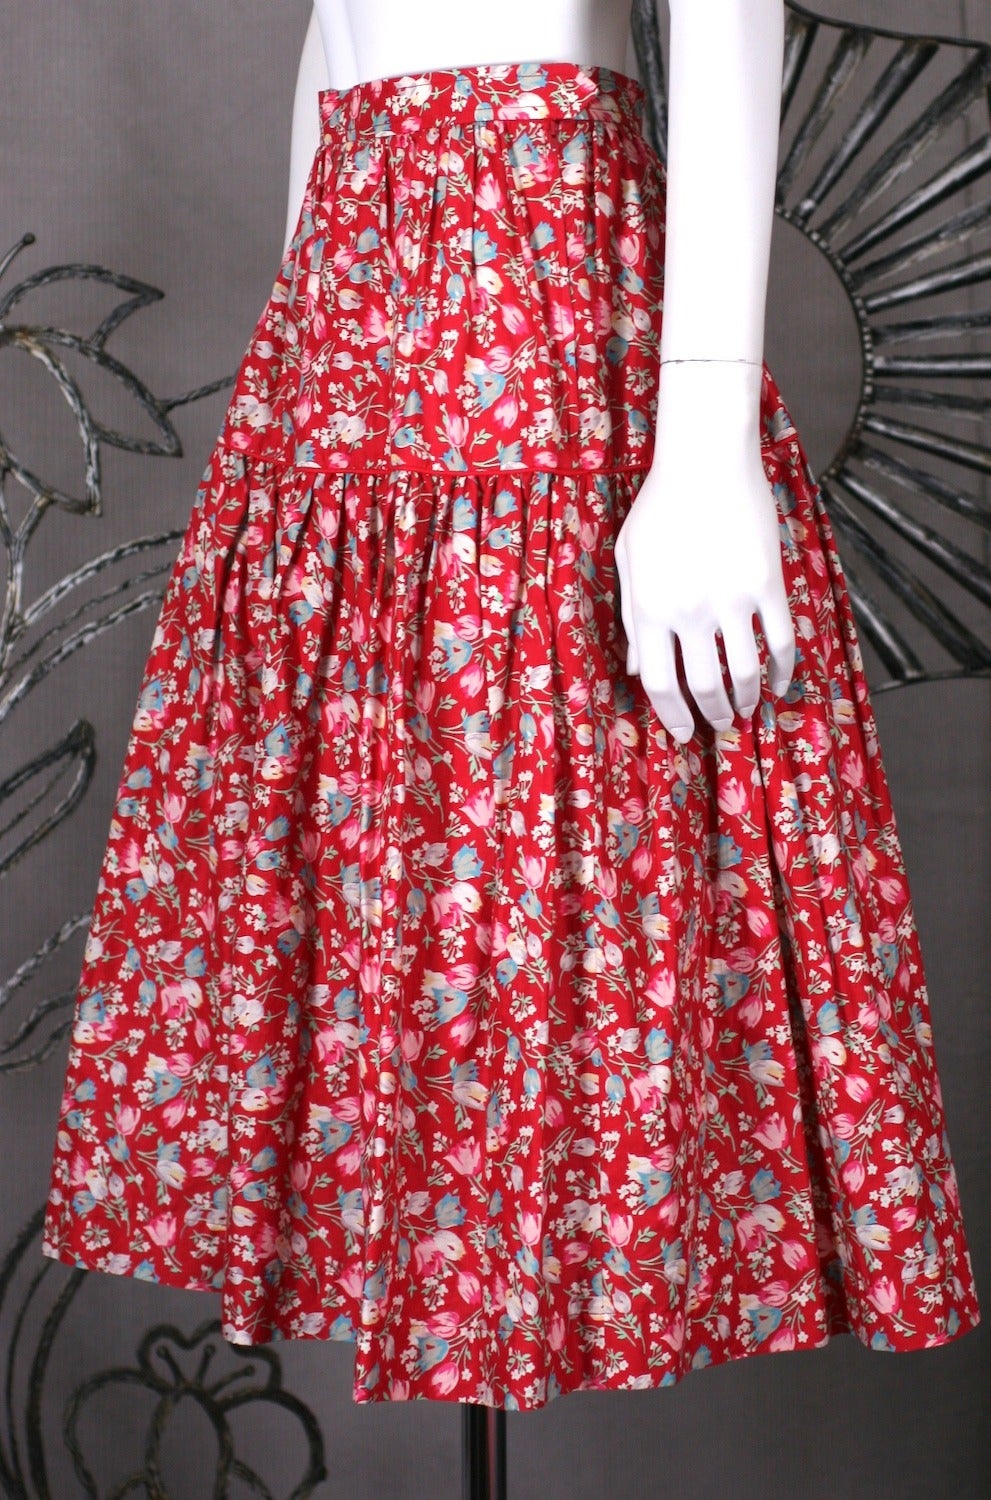 Yves Saint Laurent's Boussac cotton red floral skirt with pipe edged hip yoke and full skirt. 1980's France. Vintage Size 36. Excellent condition.